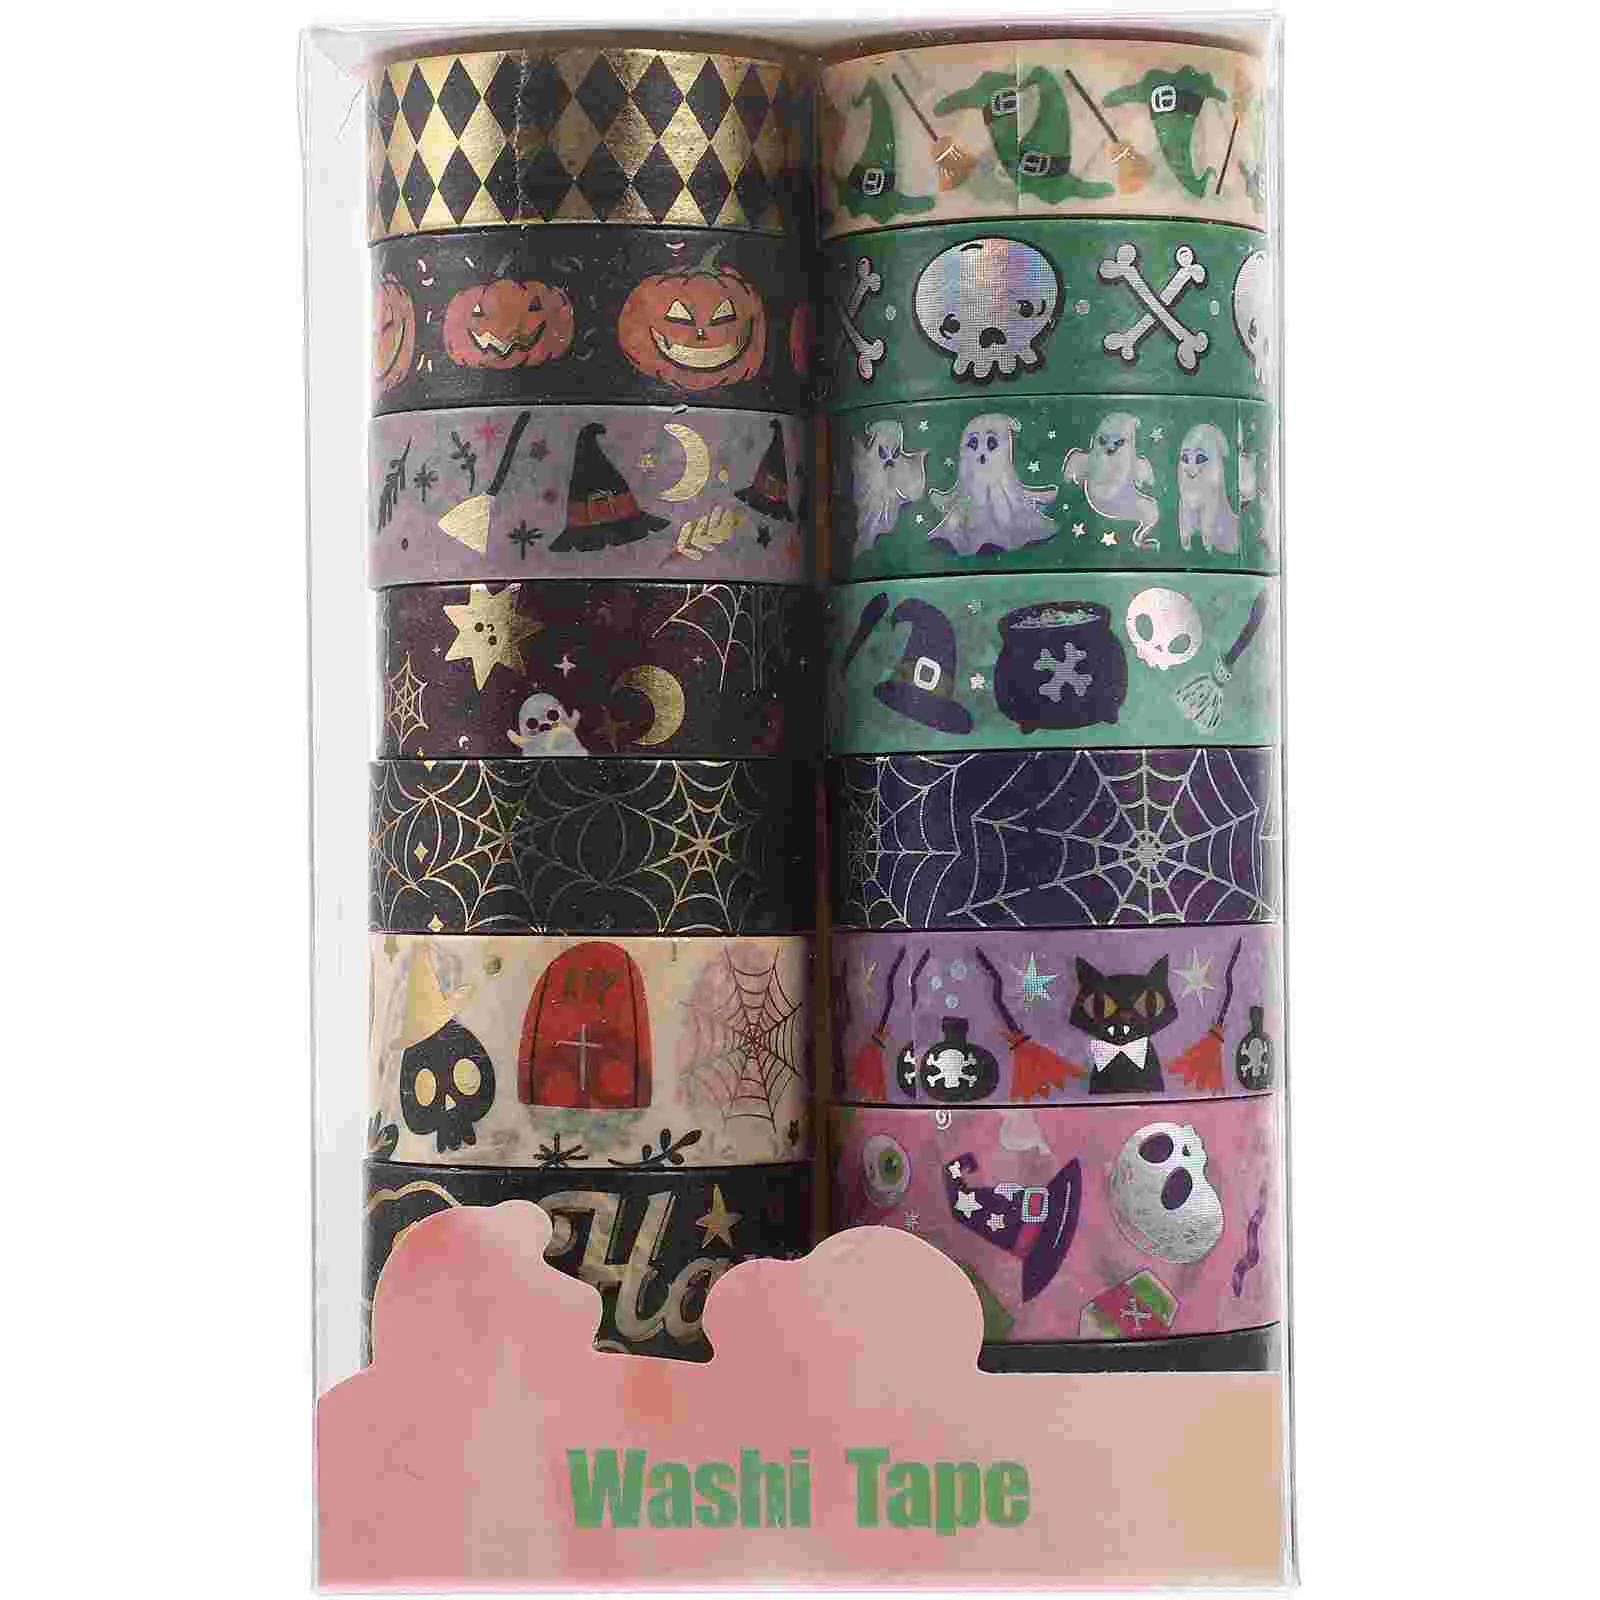 

16 Rolls Aesthetic Washi Tape Festival Tapes Halloween Decor Elements DIY Crafting Japanese Paper Decorative Cute